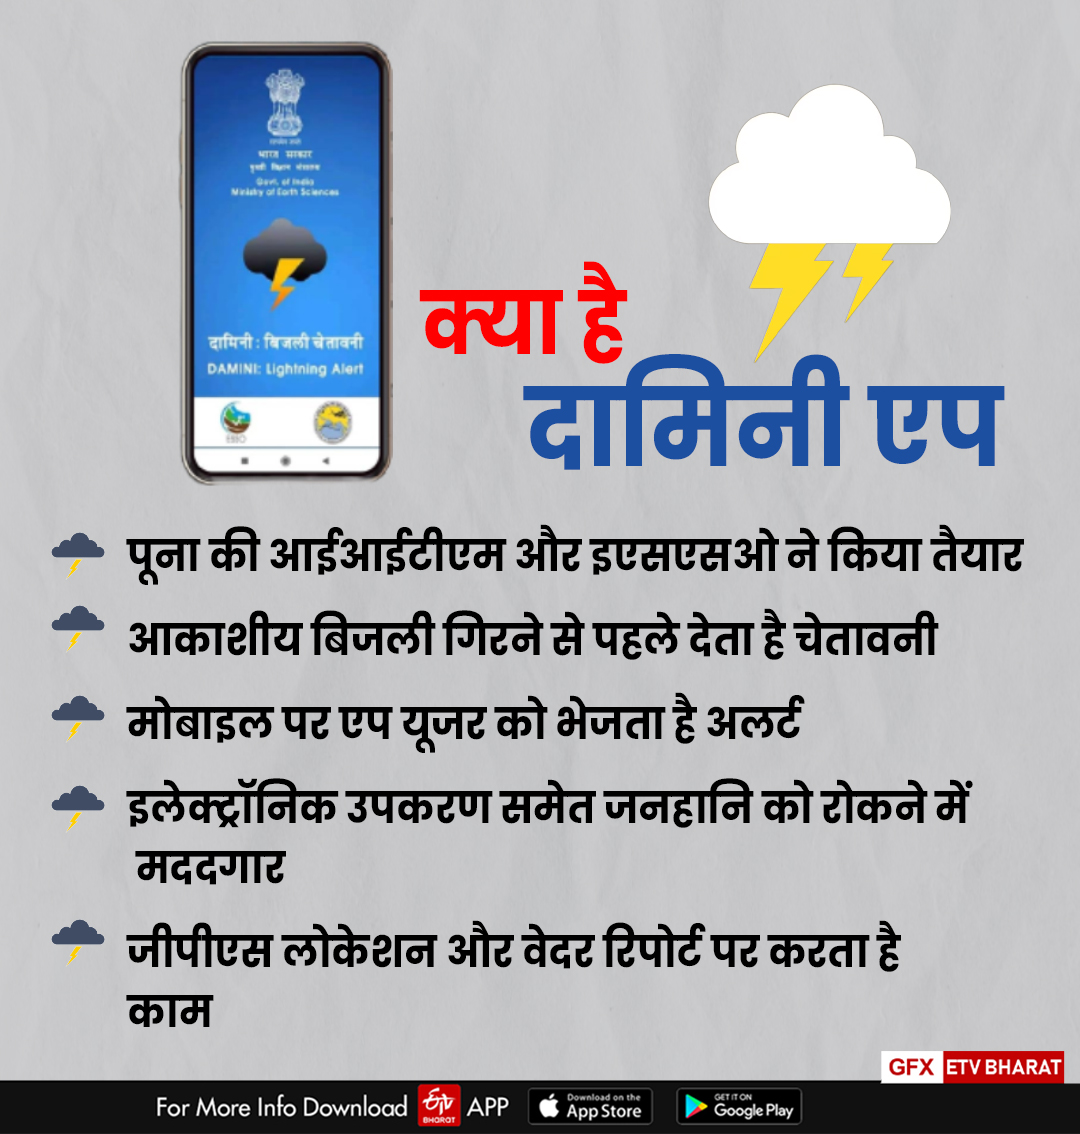 Know about Damini app